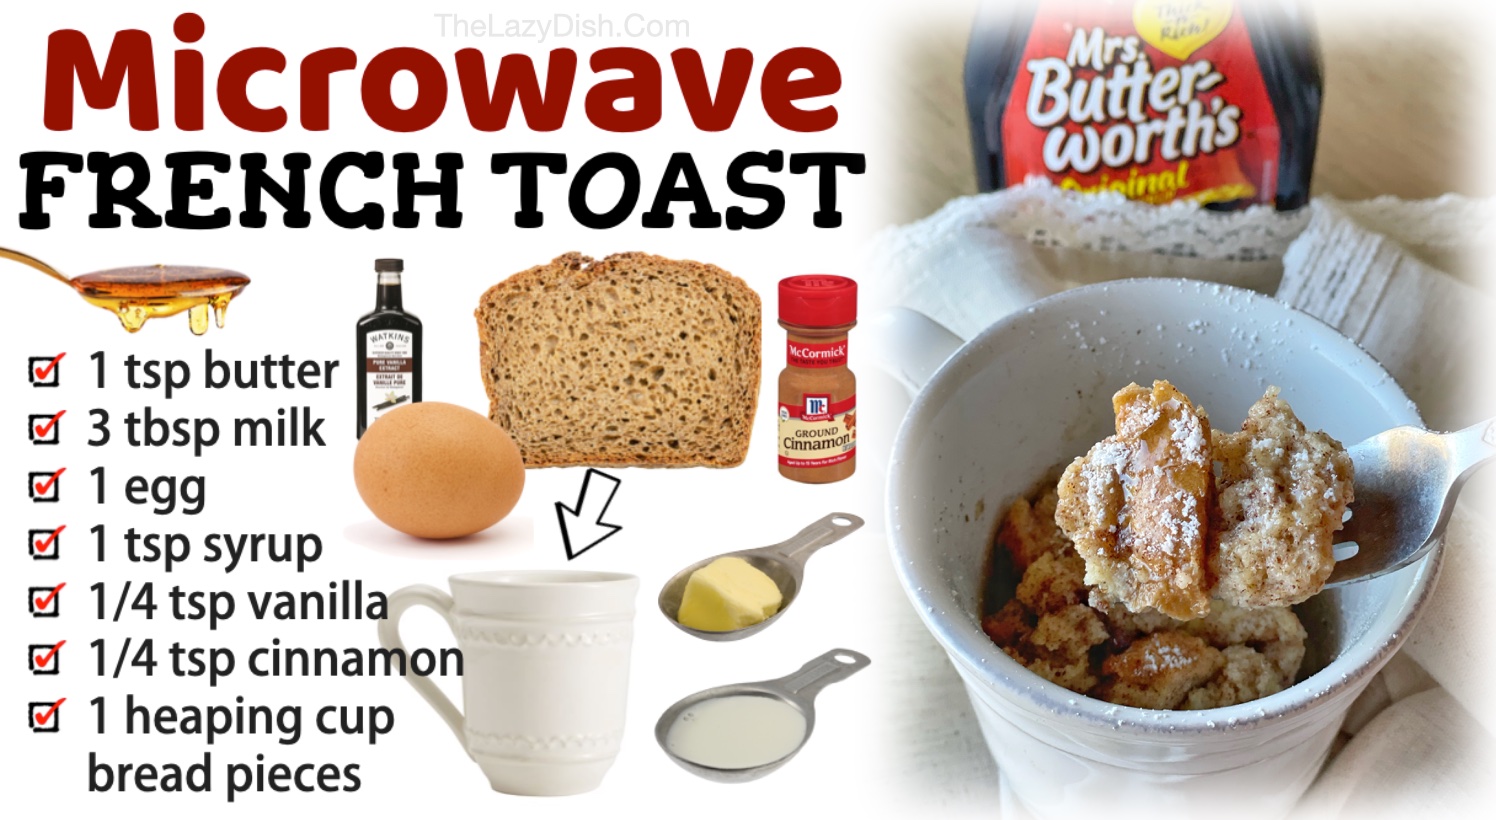 Microwave french toast is a great way to switch up your breakfast! I